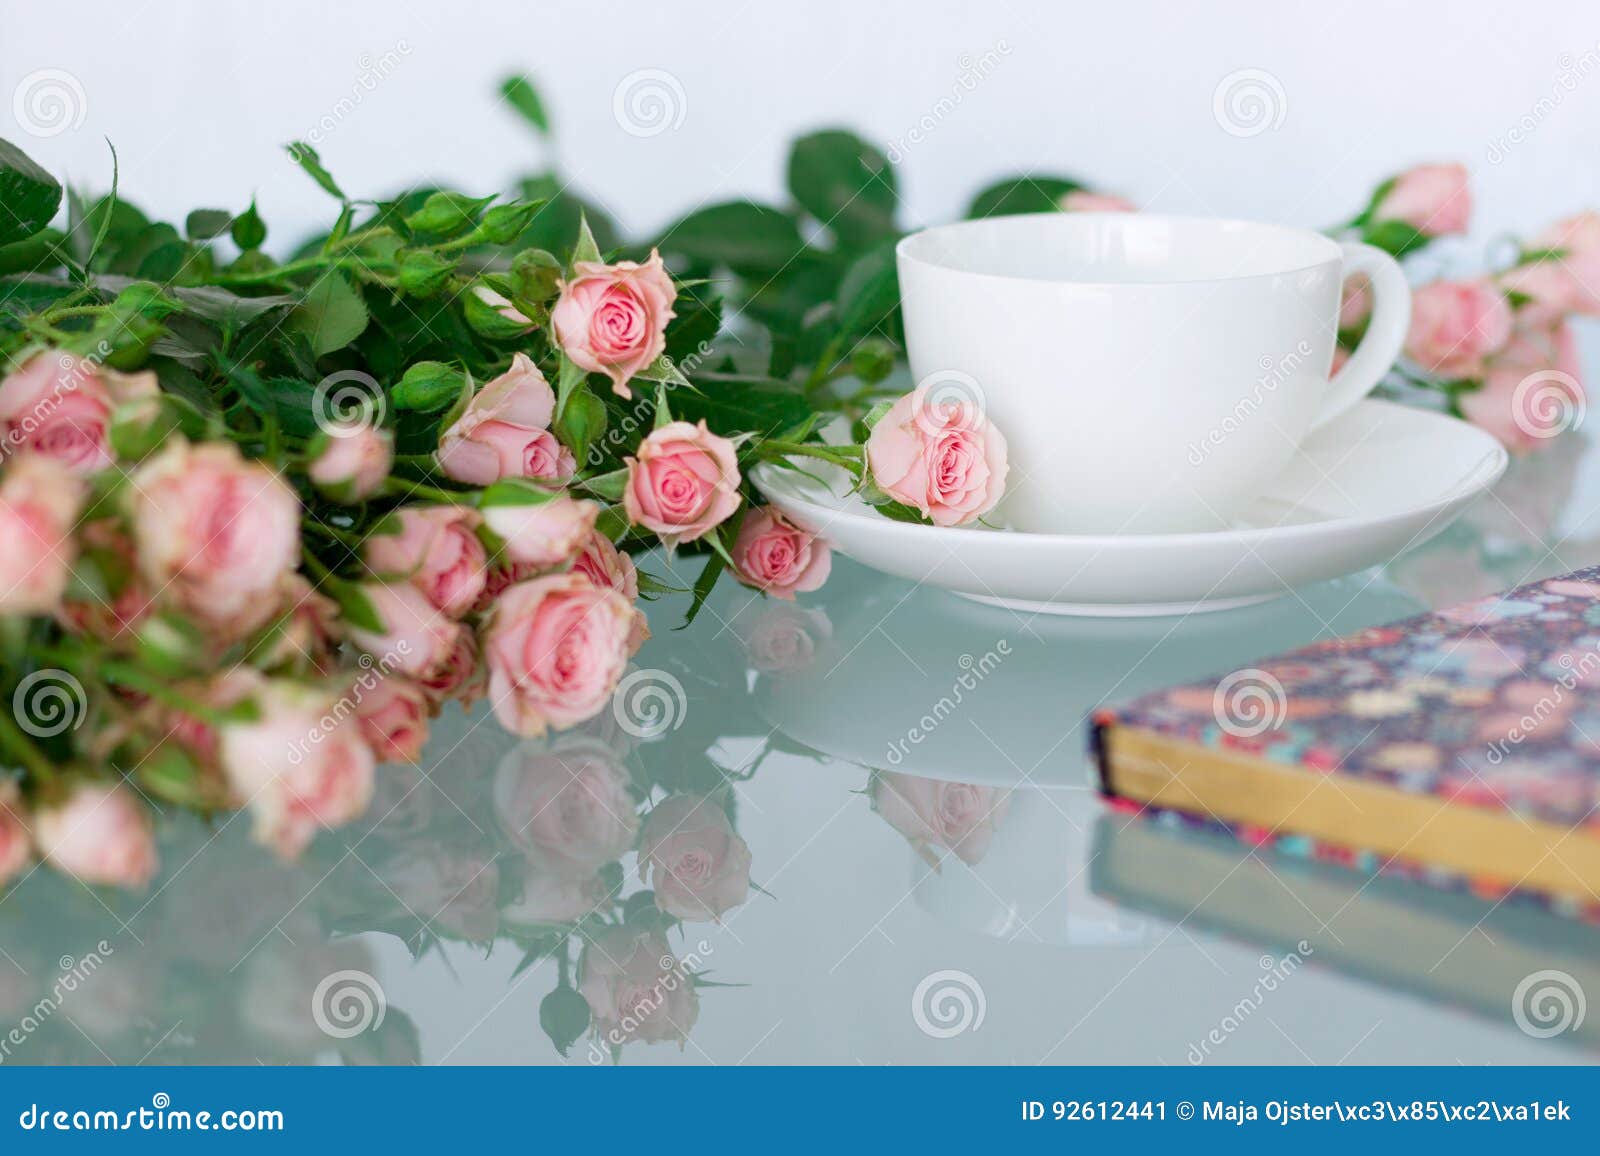 Woman Office Desk with Blossom Flowers Stock Image - Image of feminine ...